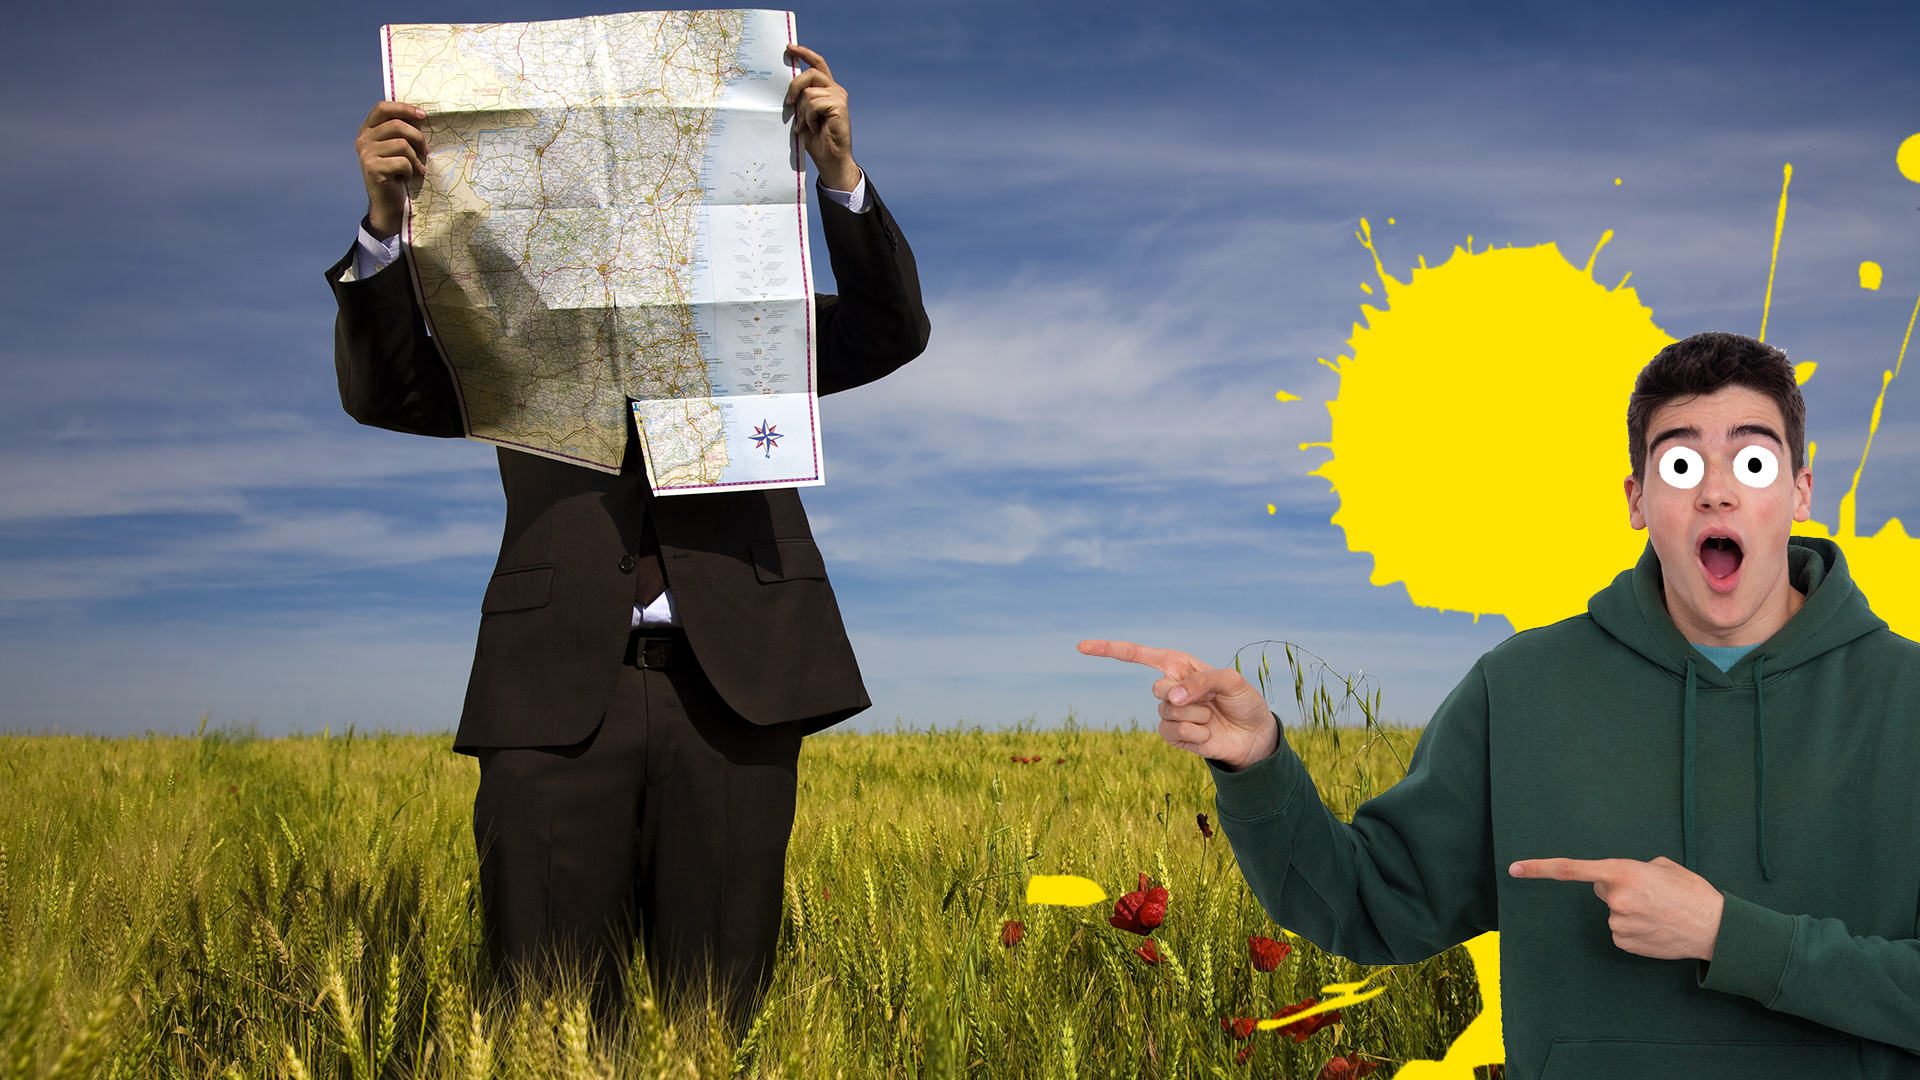 A man looking at a map in an empty field, with another man pointing at him